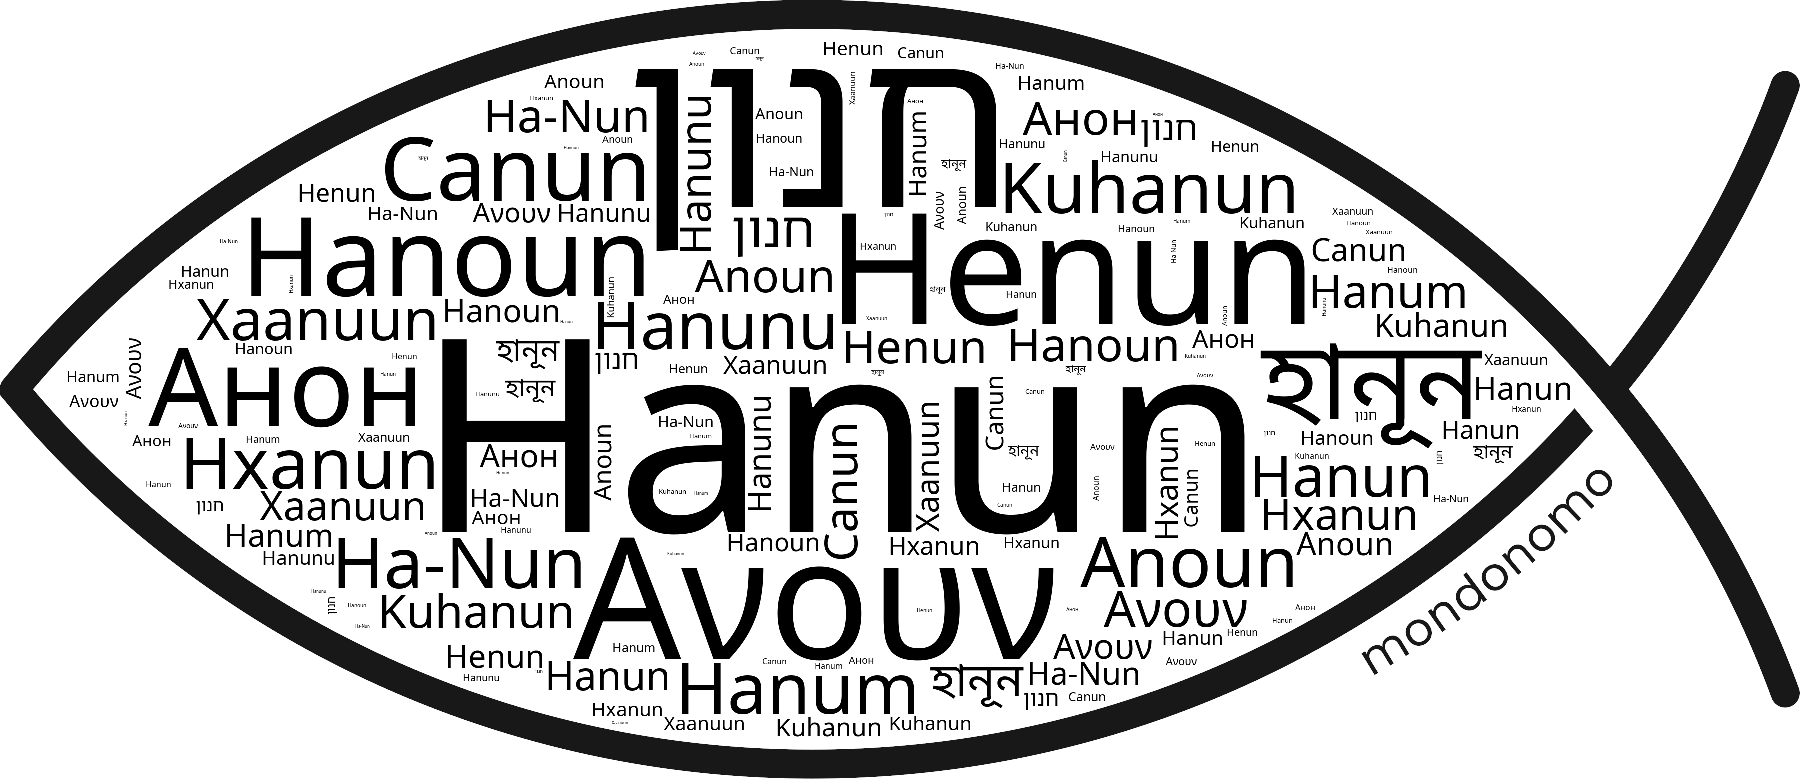 Name Hanun in the world's Bibles